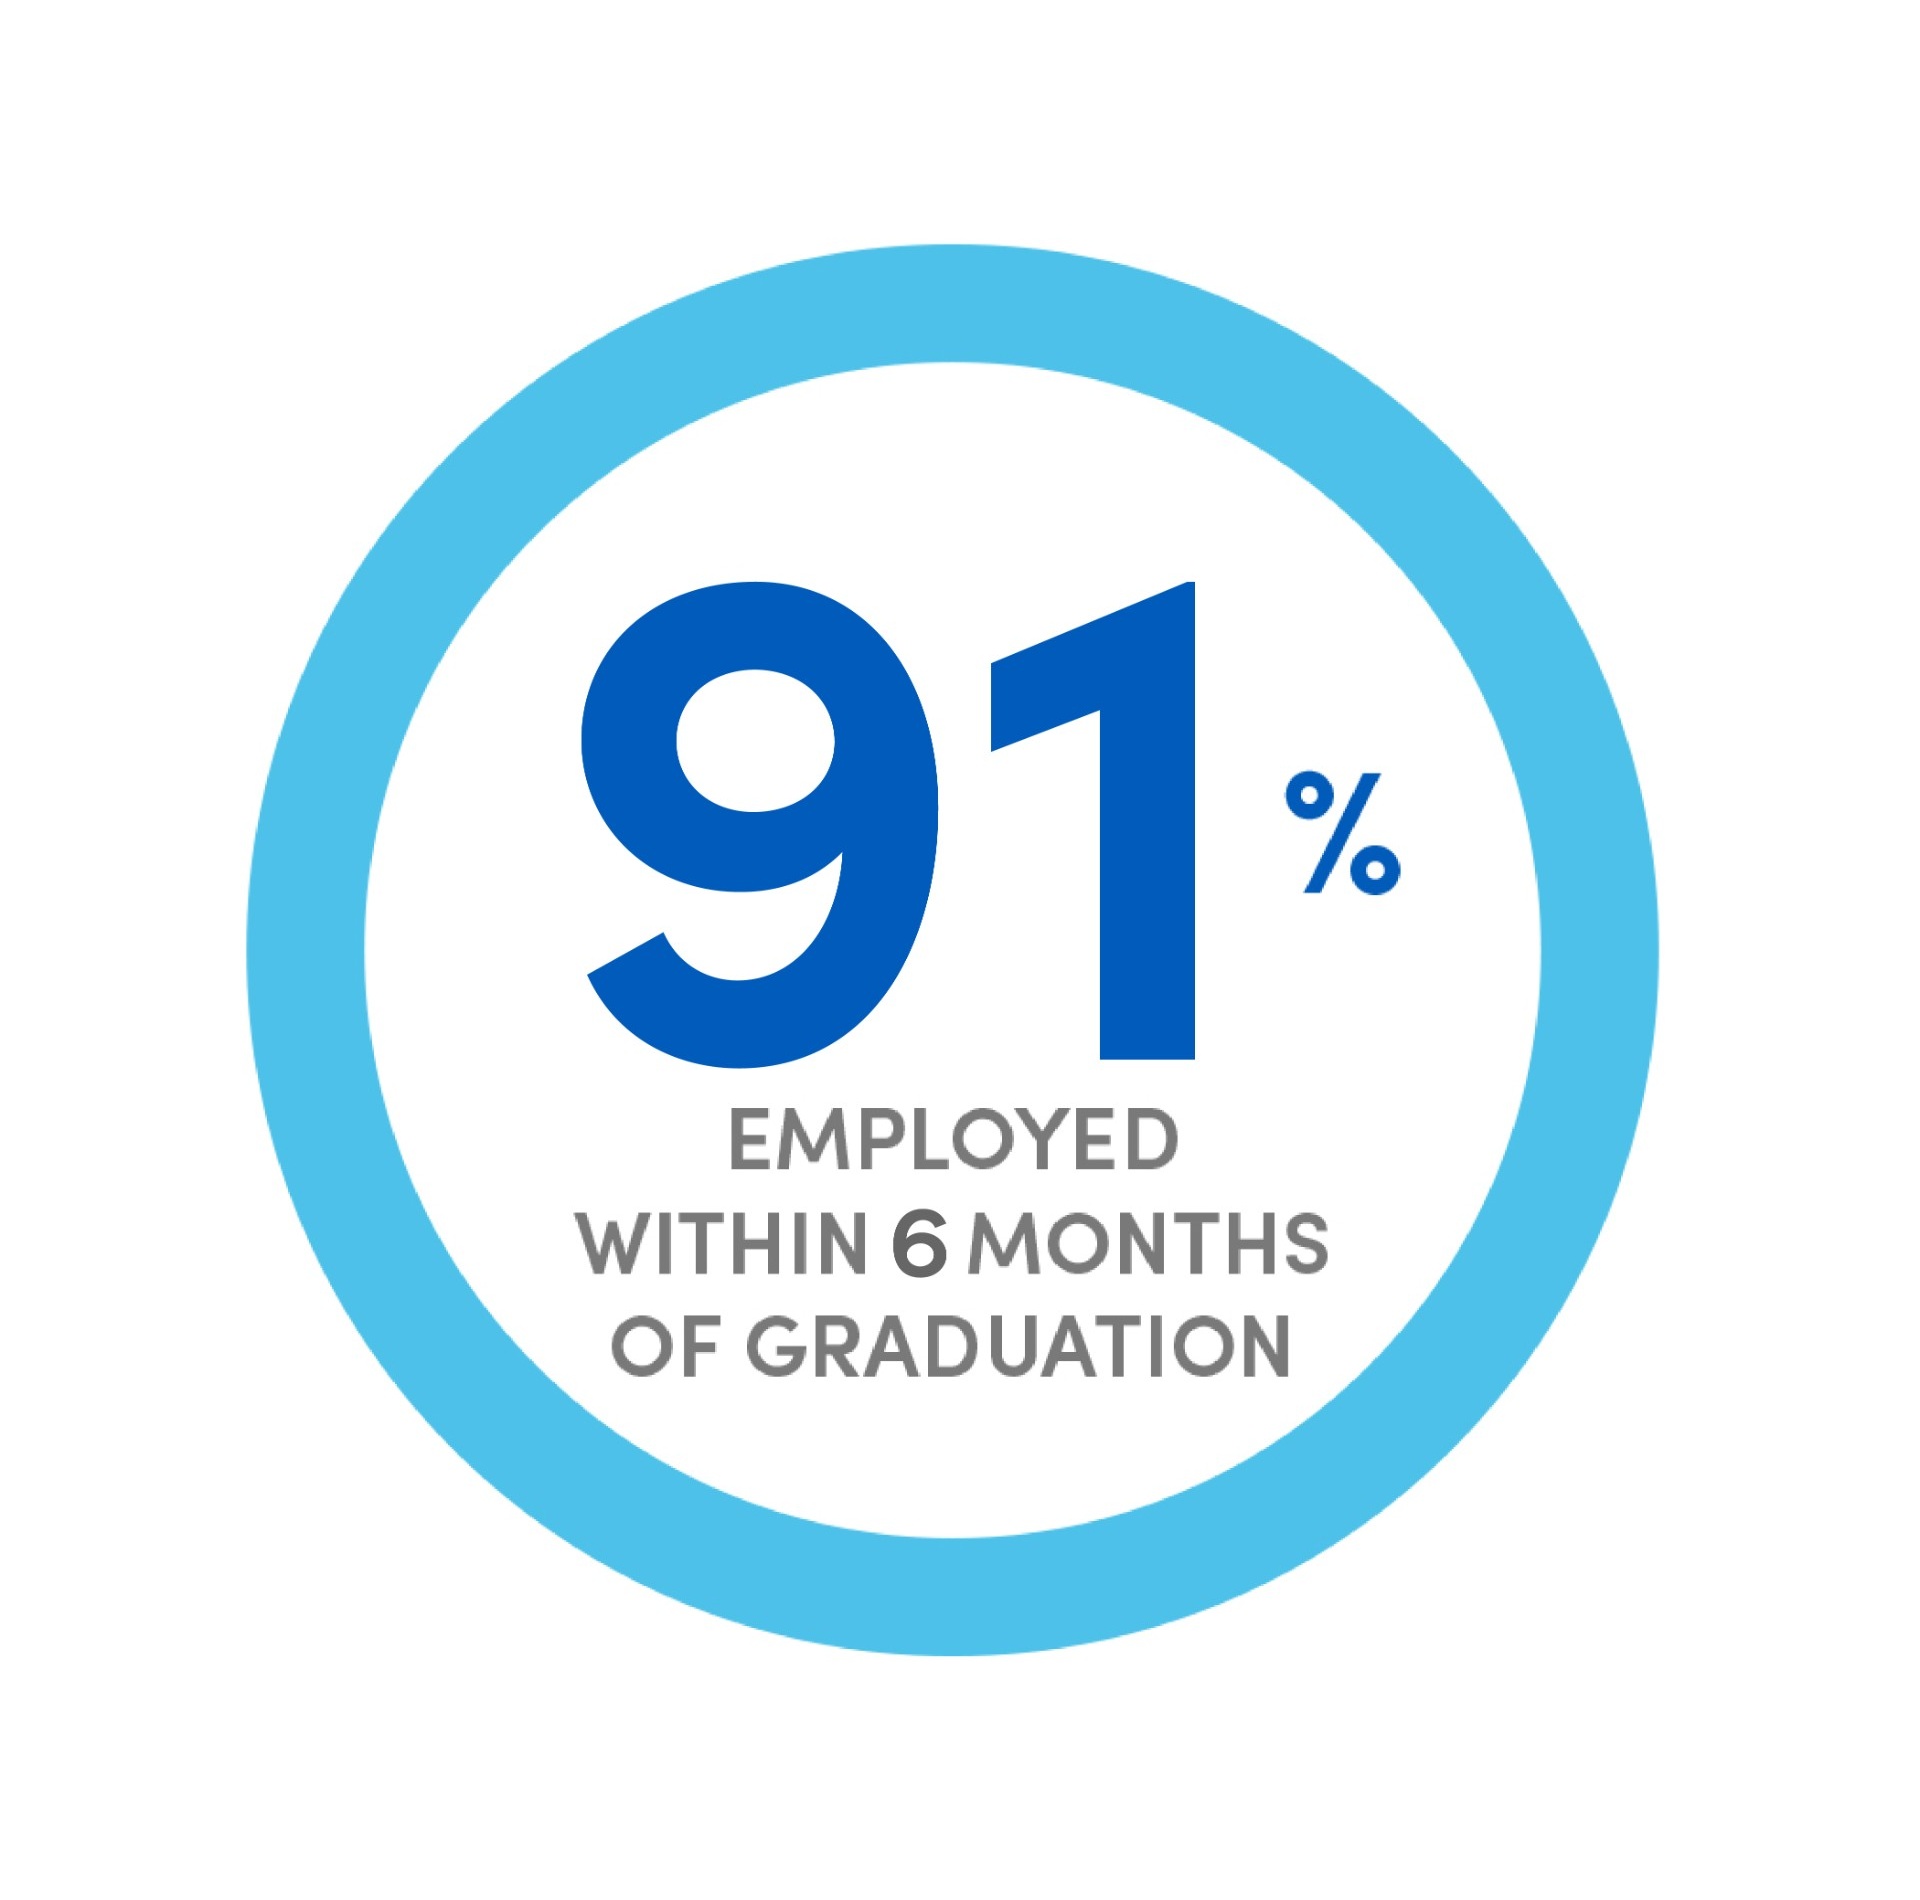 91% employment within 6 months of graduation. 